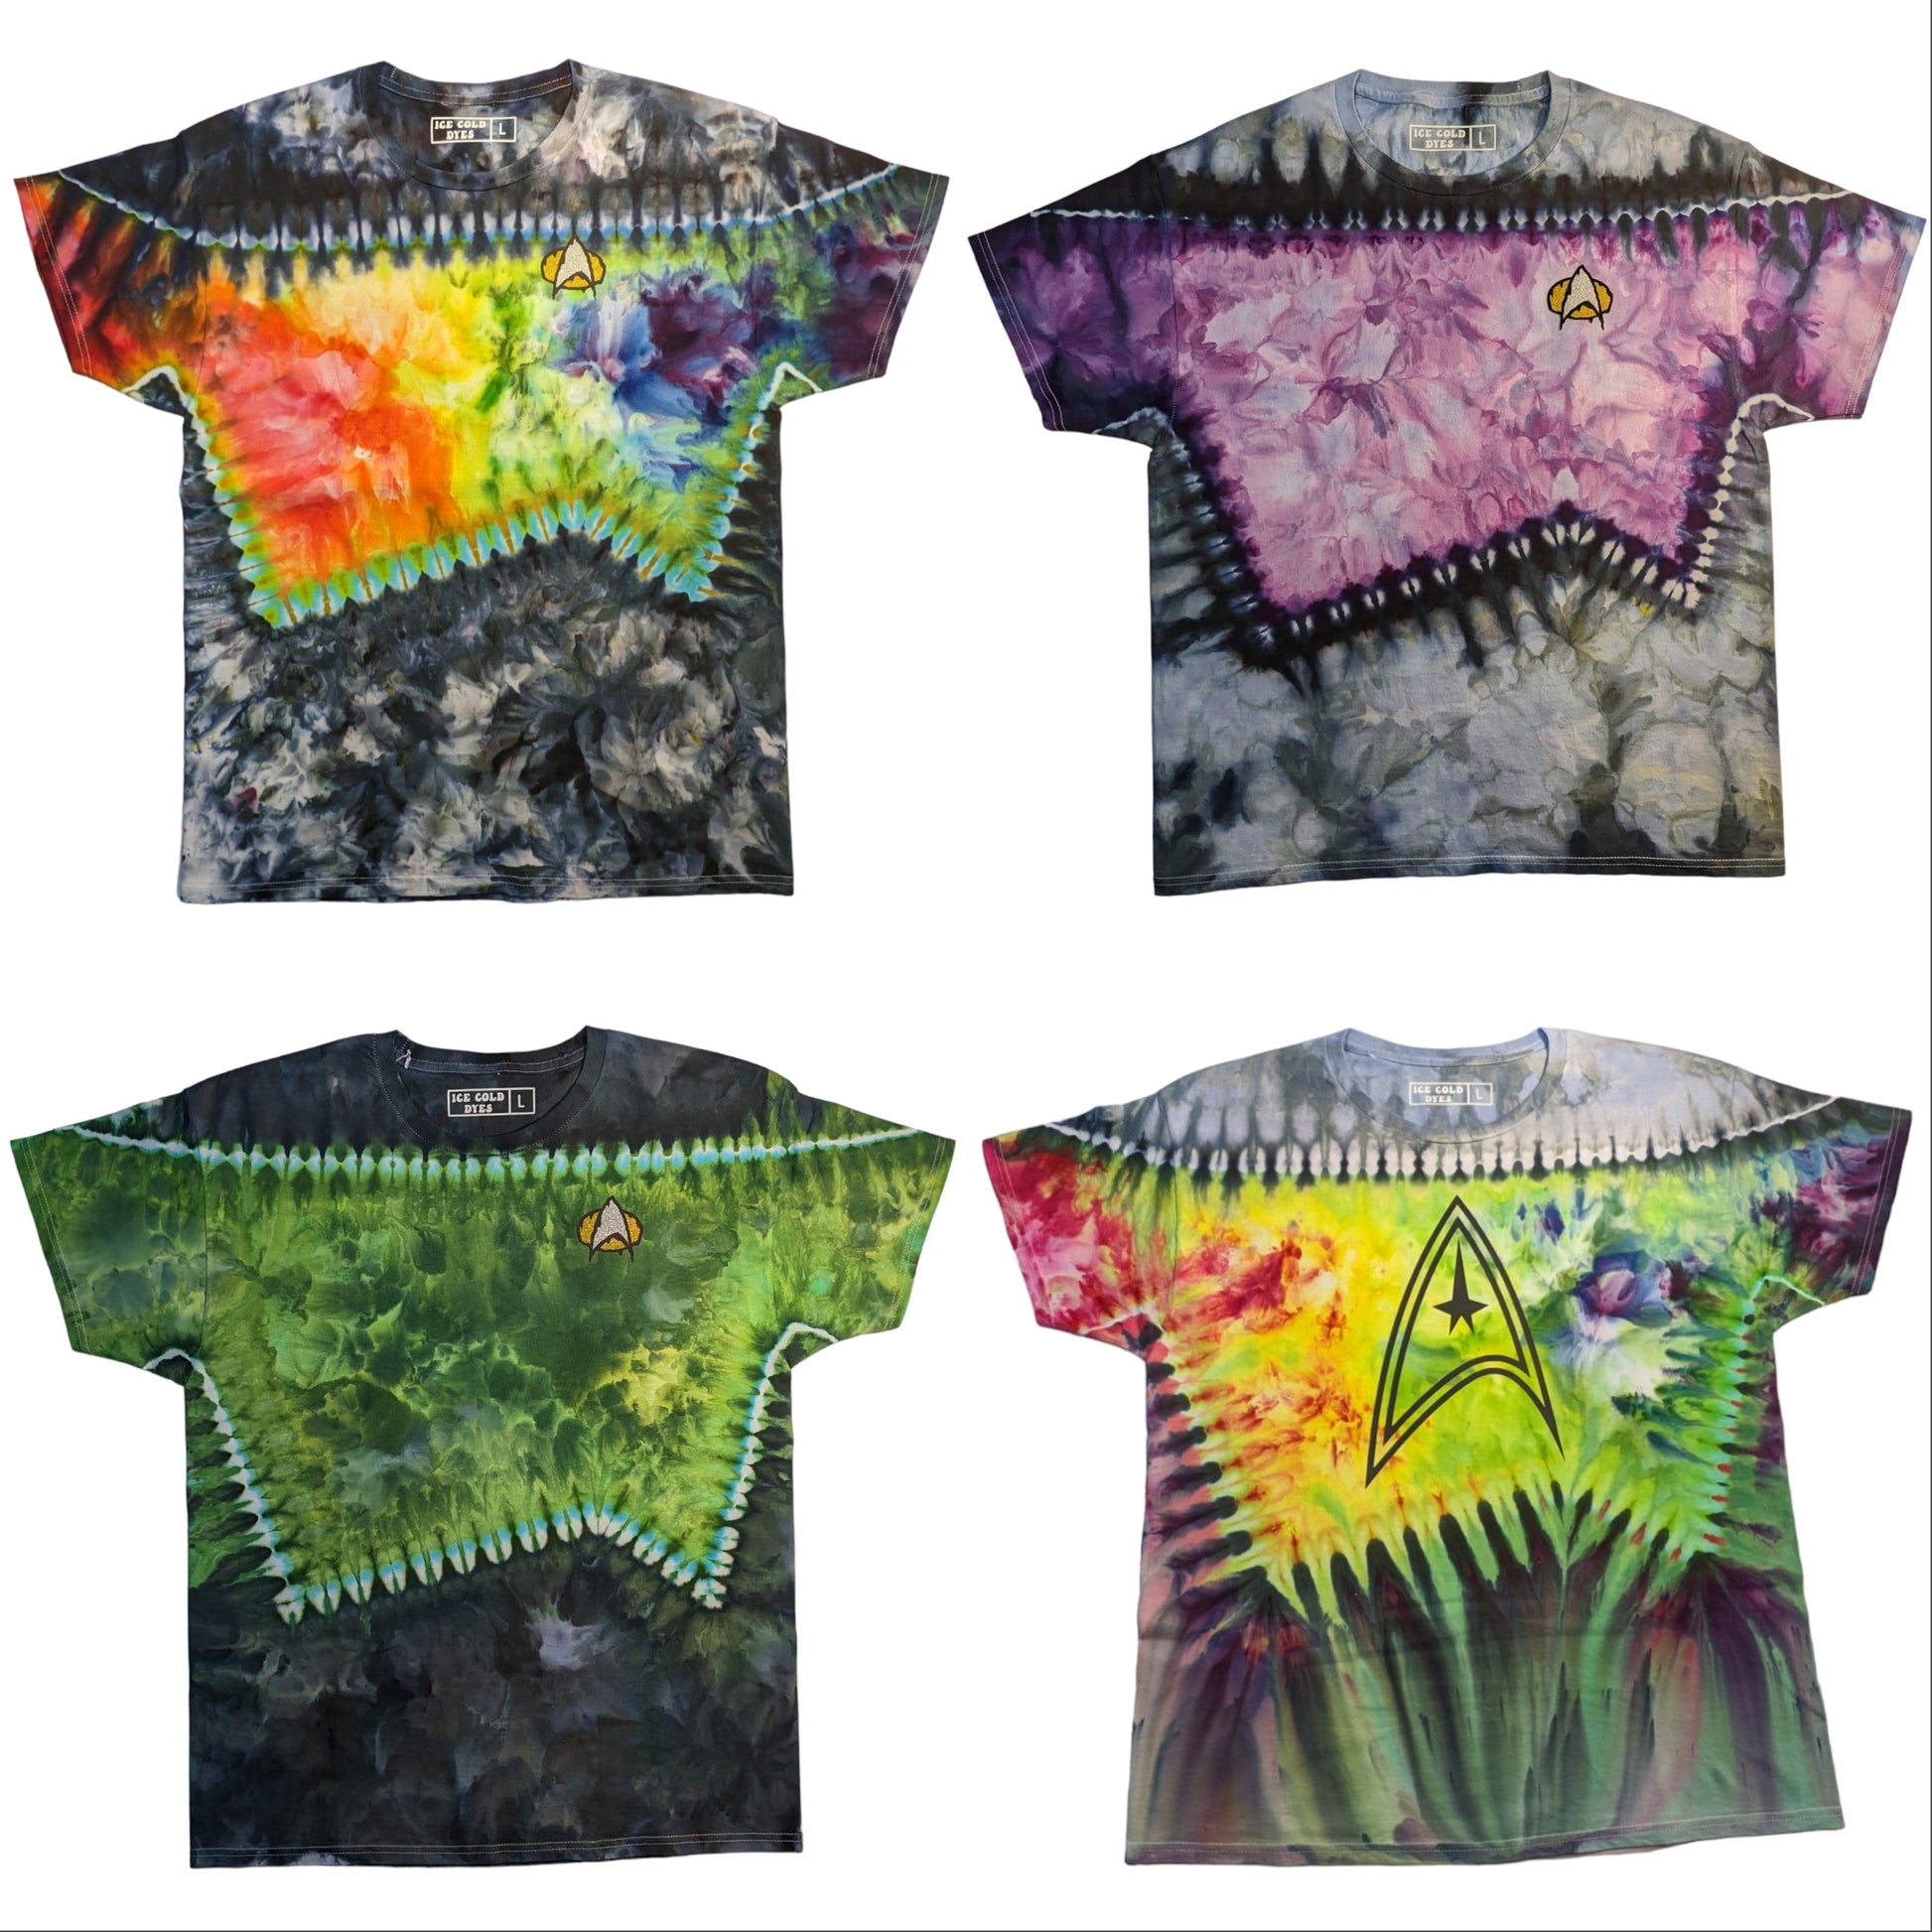 How was this tie-dyed t-shirt made?